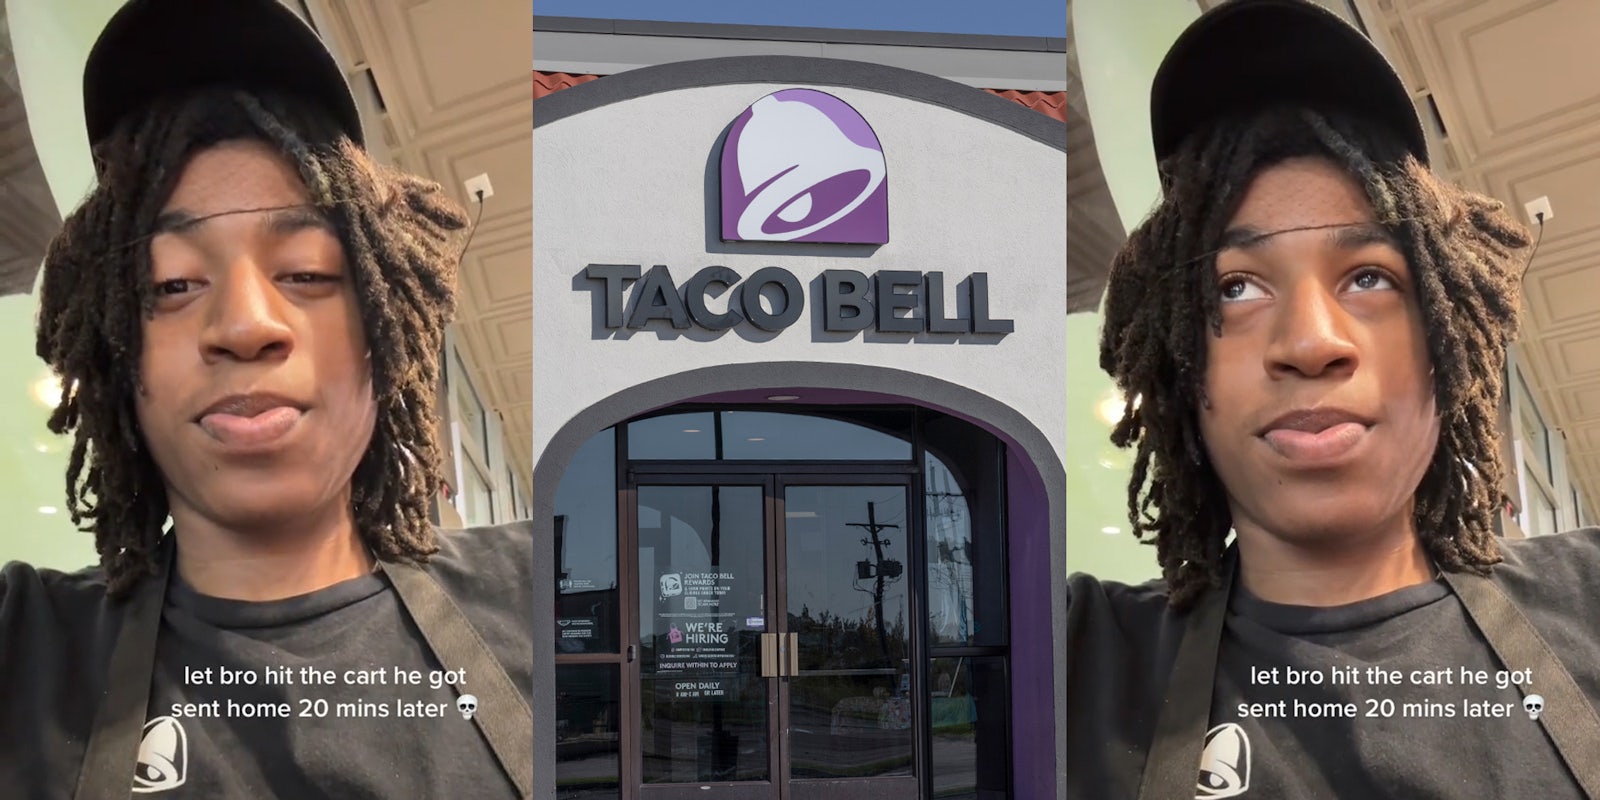 Taco Bell worker with caption 'let bro hit the cart he got sent home 20 mins later' (l) Taco Bell building with sign (c) Taco Bell worker with caption 'let bro hit the cart he got sent home 20 mins later' (r)